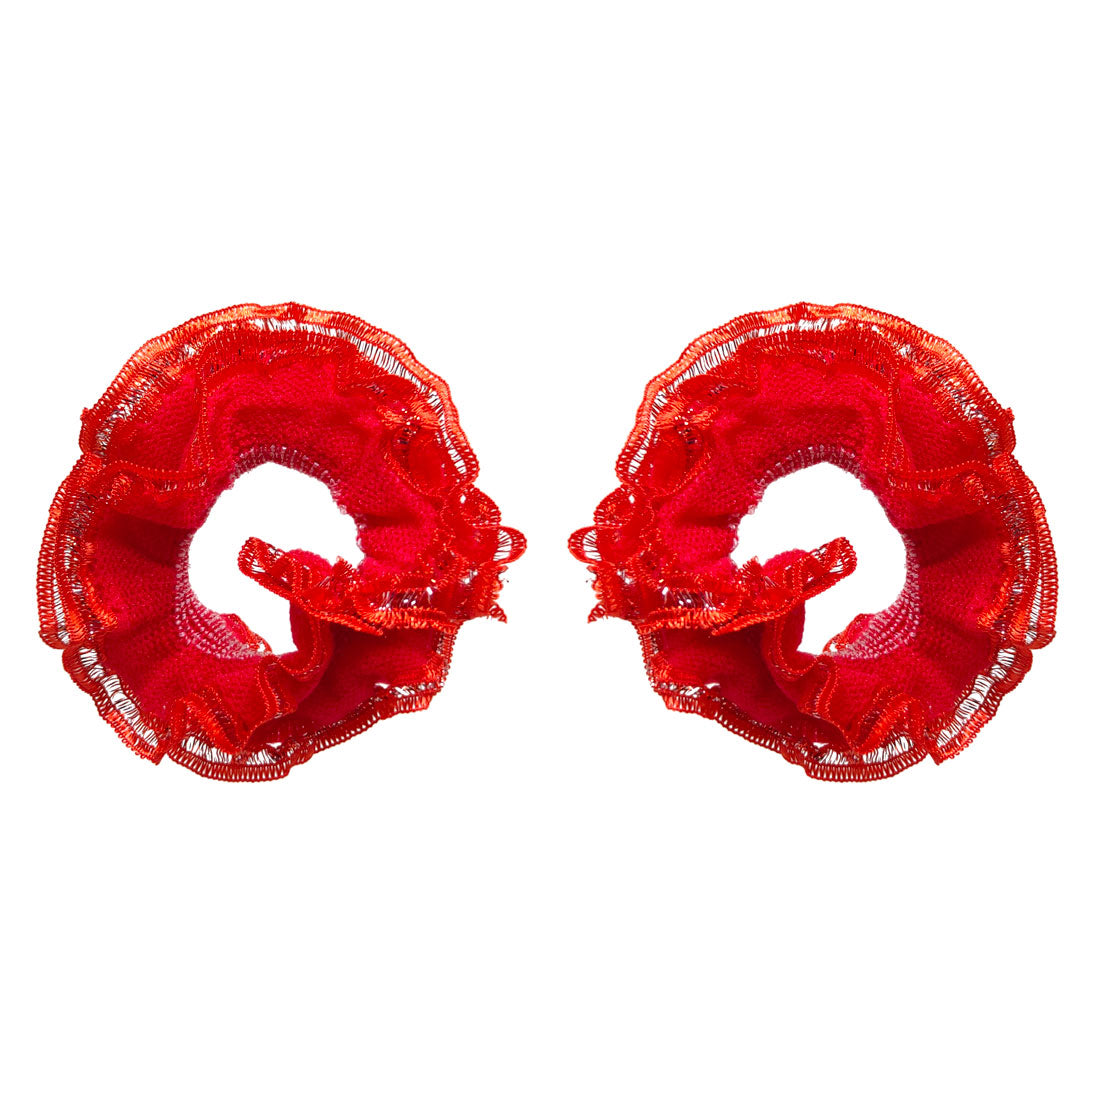 Anokhi Ada Hair Ties/ Ponytail Holders for Girls and Women (Set of 2 Ponytail Holders, Red)-Z J-09